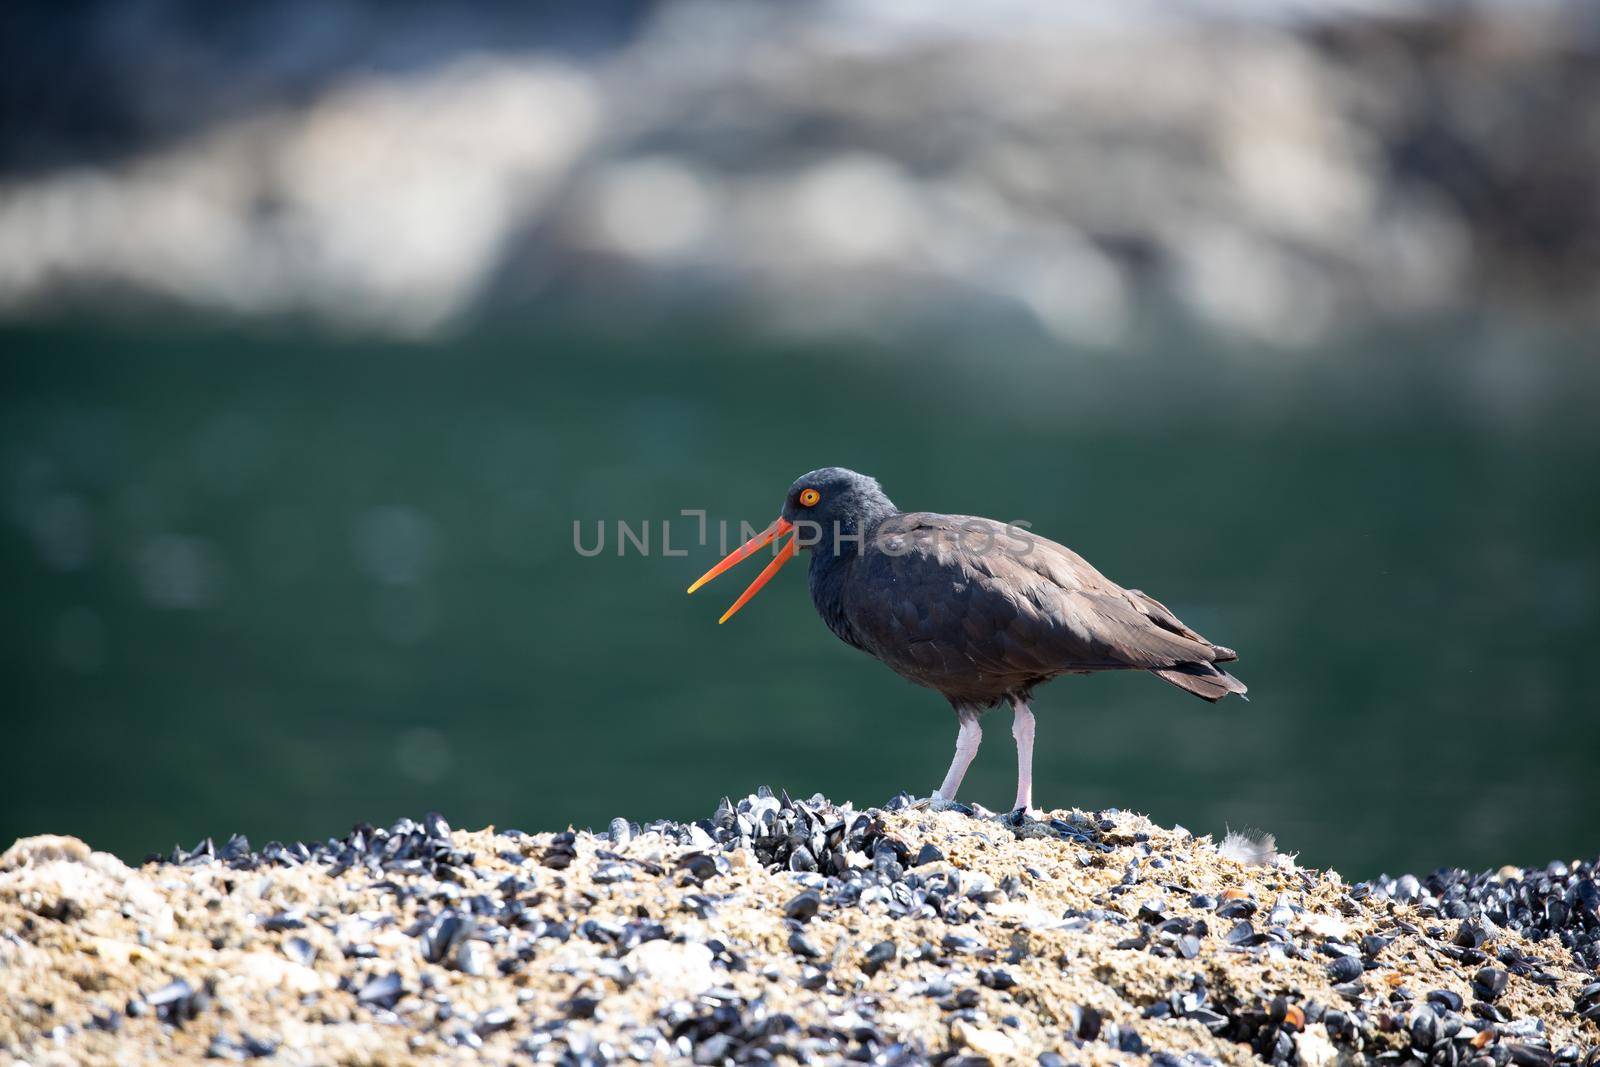 Black Oystercatcher with open beak and walking on a shell covered rock with water in the background by Granchinho